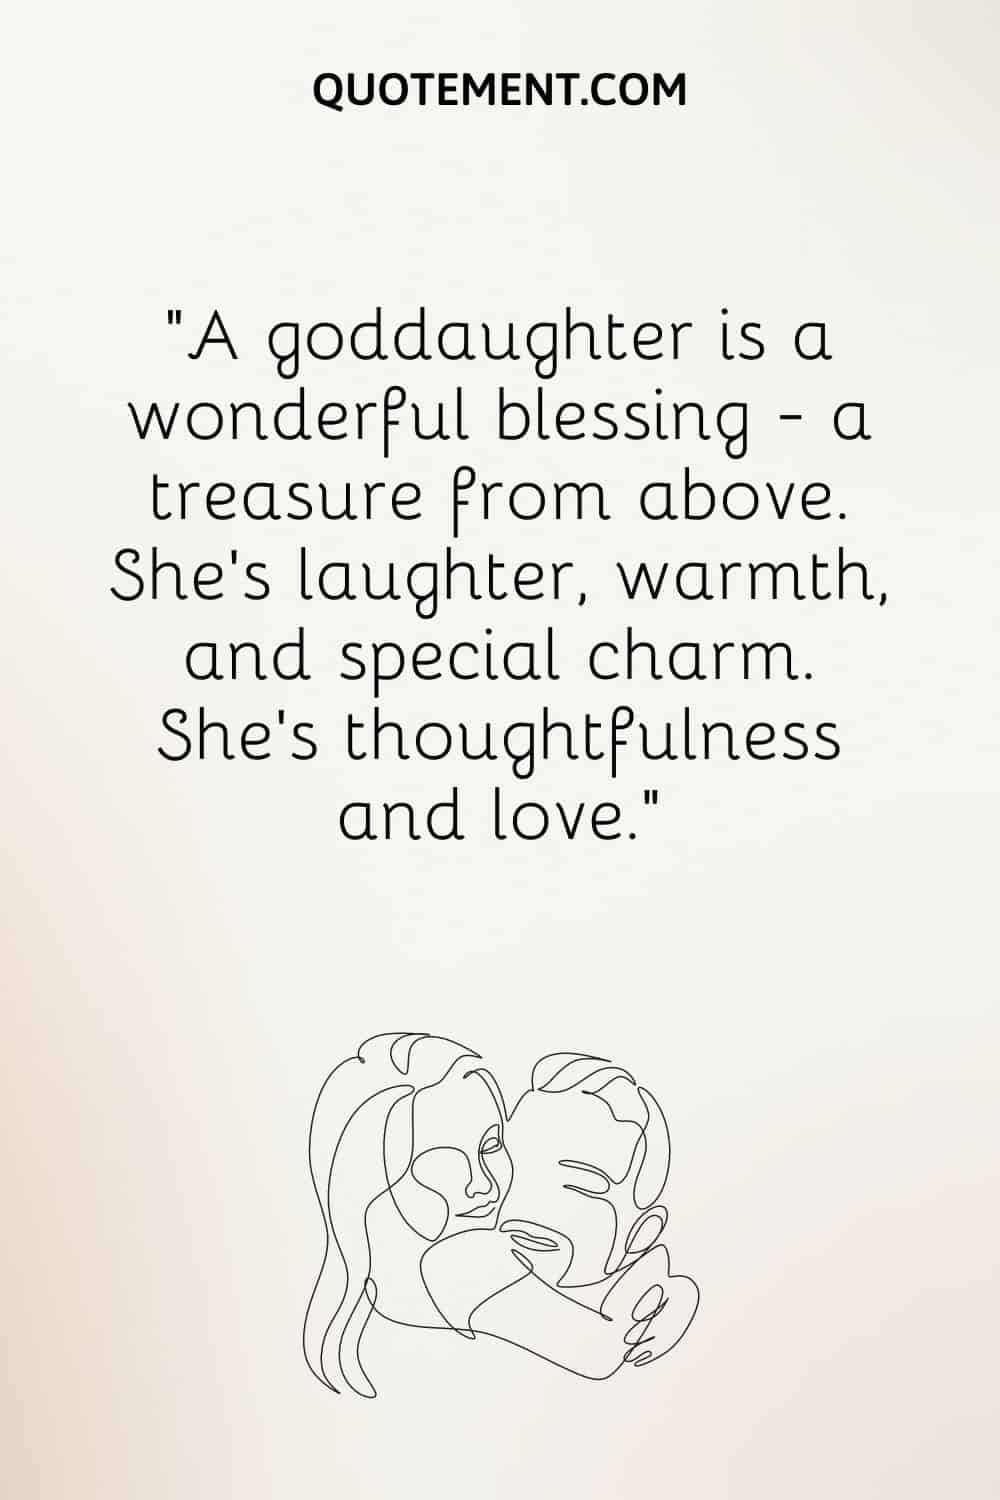 “A goddaughter is a wonderful blessing — a treasure from above. She’s laughter, warmth, and special charm. She’s thoughtfulness and love.”